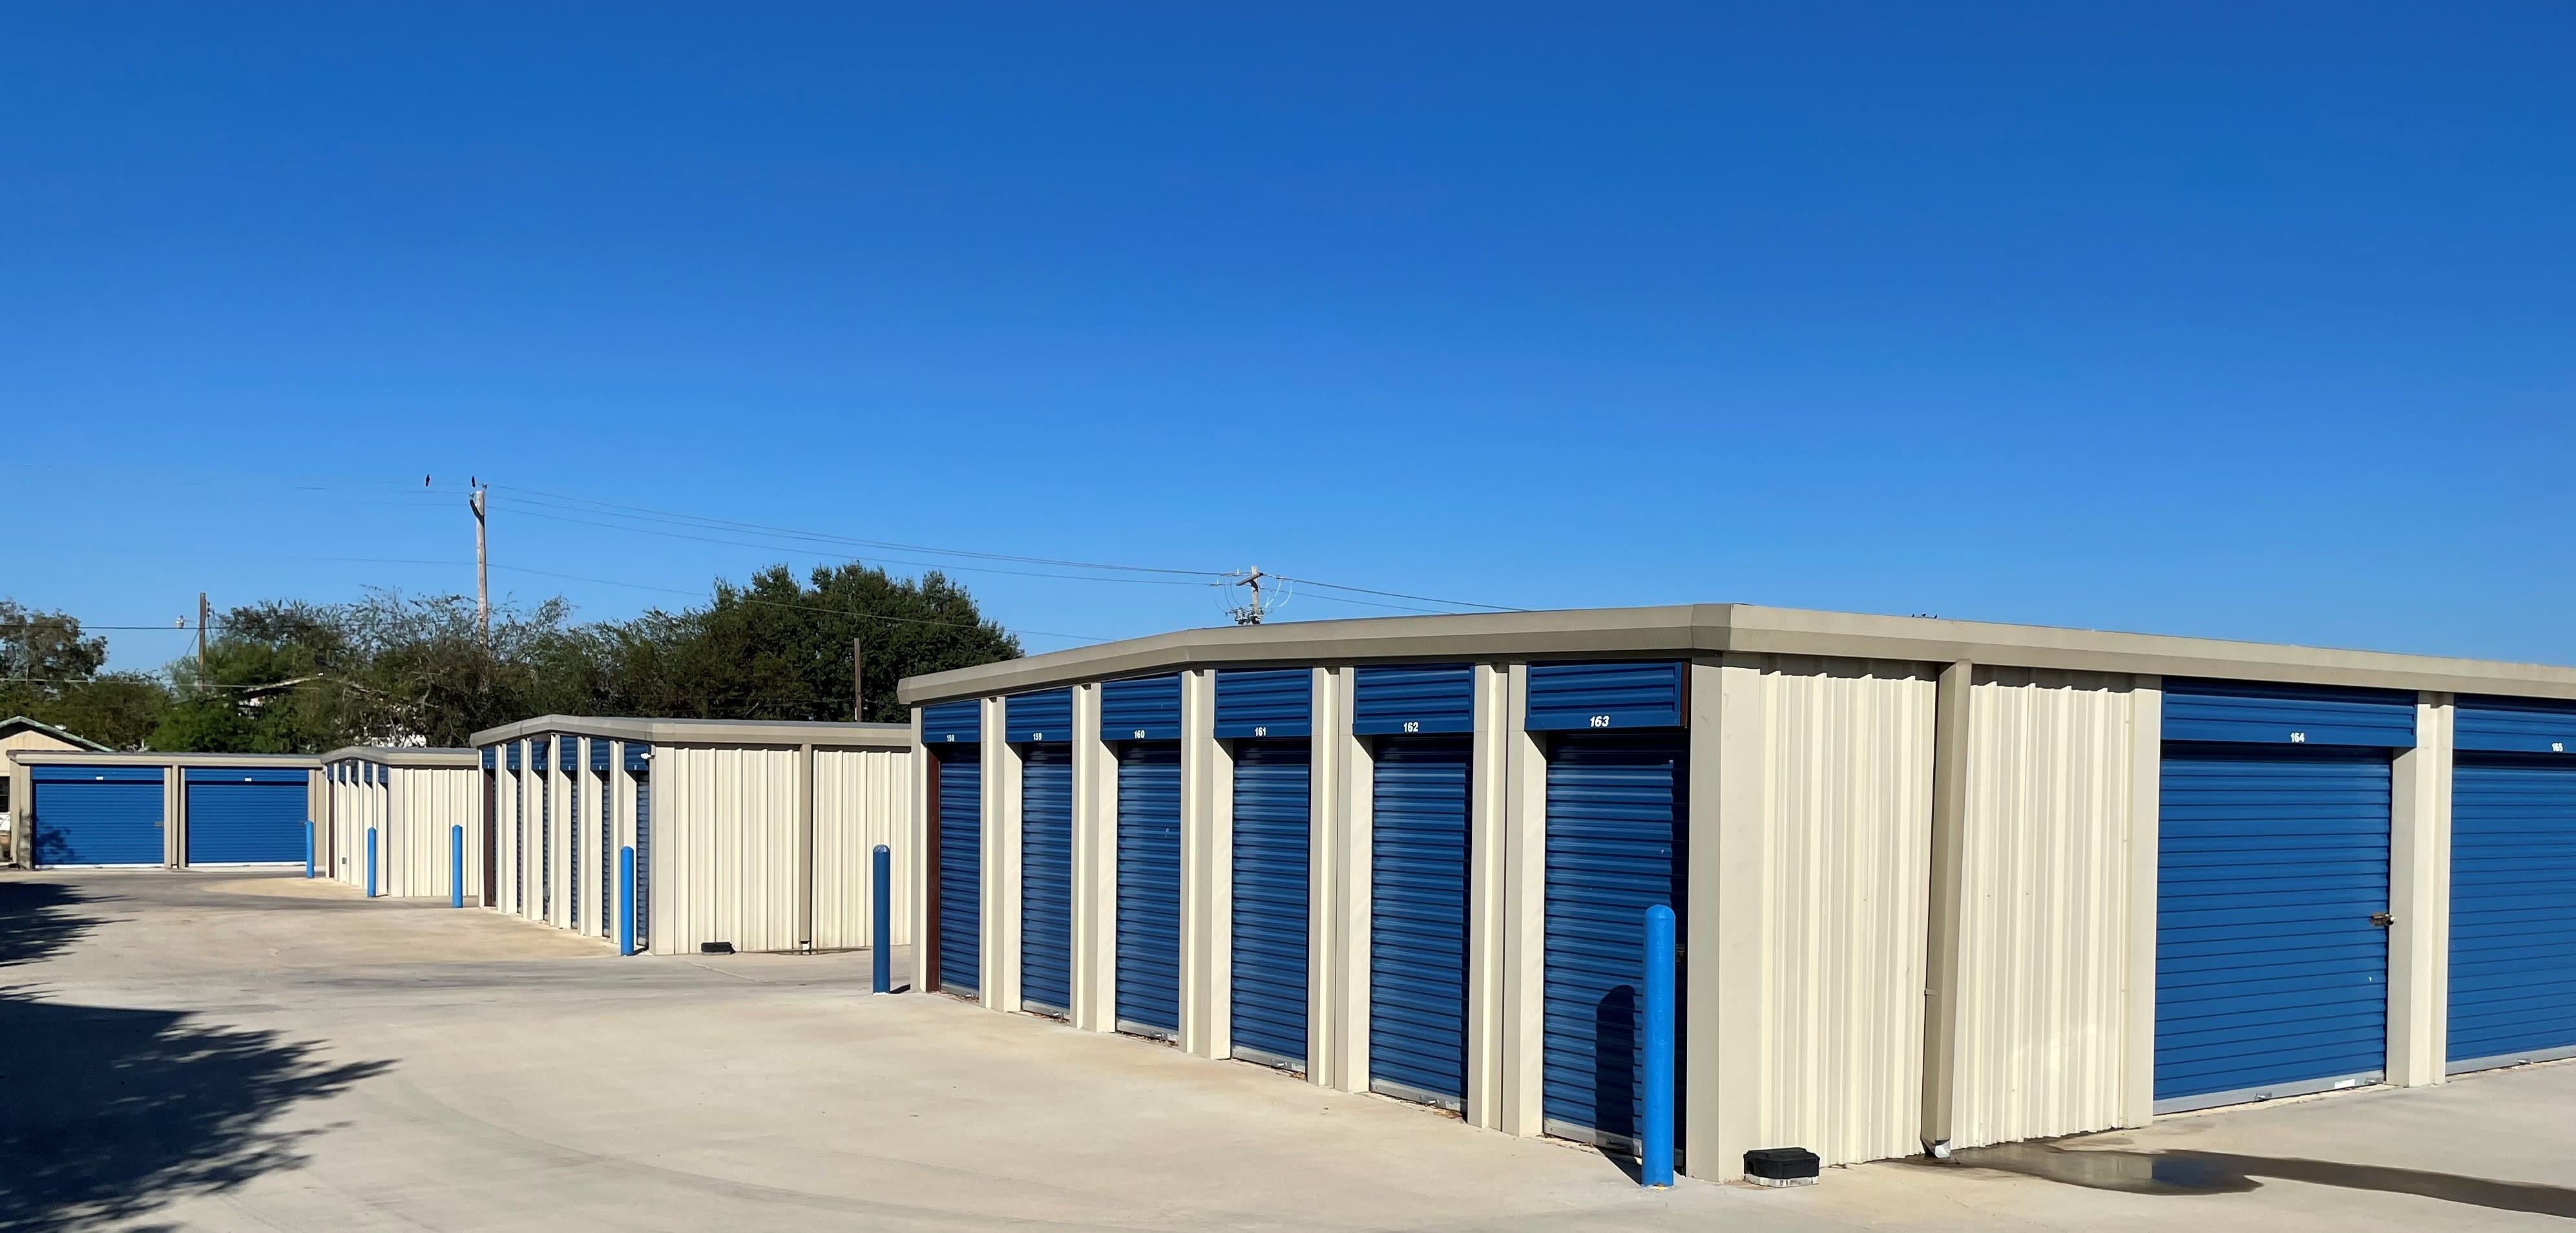 Unit sizes and prices at KO Storage of Pearsall in Pearsall, Texas